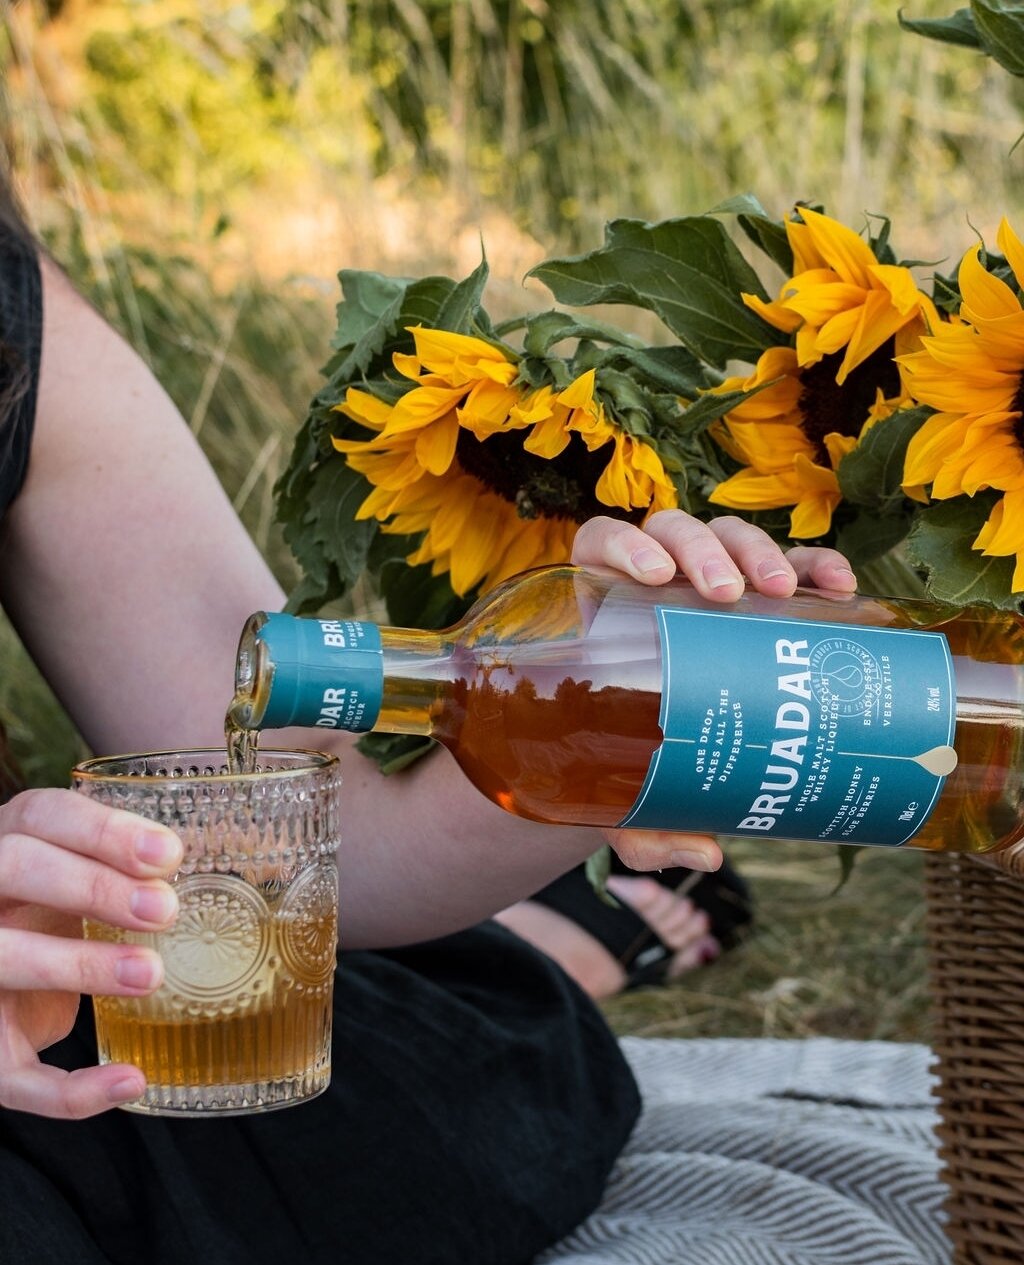 A dram of Bruadar makes the perfect accompaniment for a luxurious picnic.⁠
.⁠
.⁠
.⁠
image by @whatstacydid⁠
#bruadar #liqueur #whiskyliqueur #scotch #picnic #bruadarliqueur #dram #whisky #singlemaltliqueur